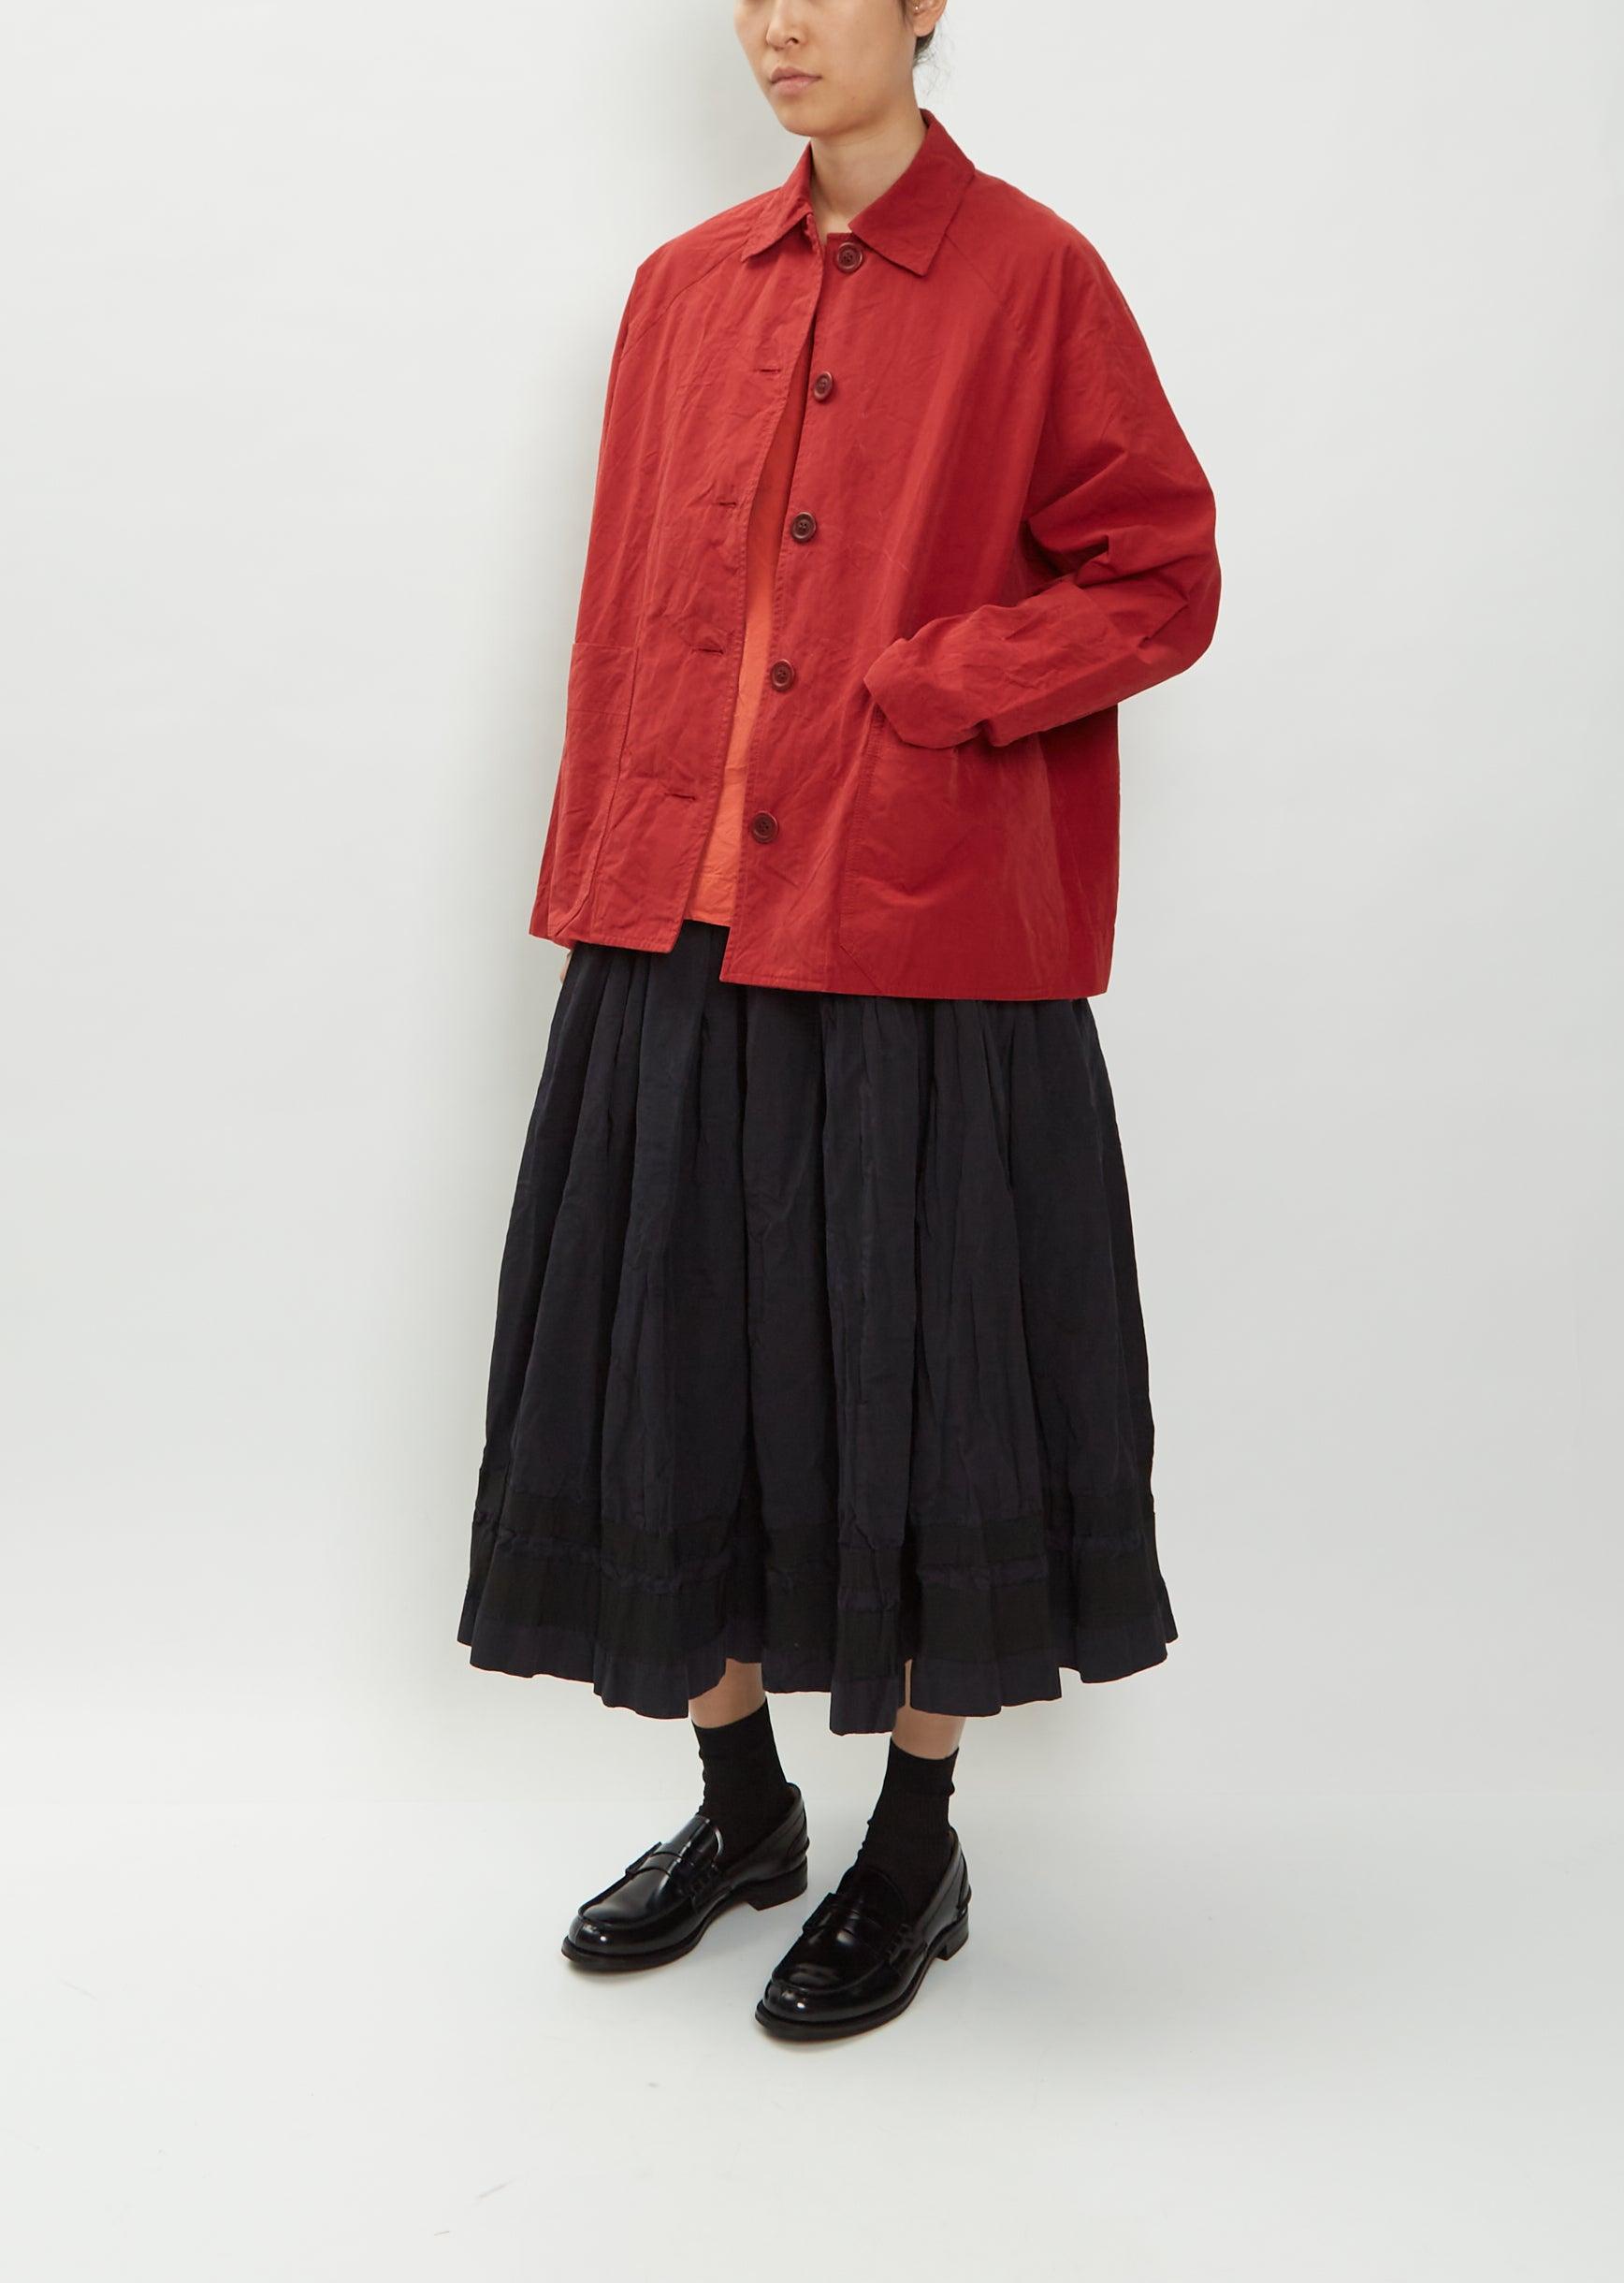 Casey Casey Rotty Jacket in Red Lyst